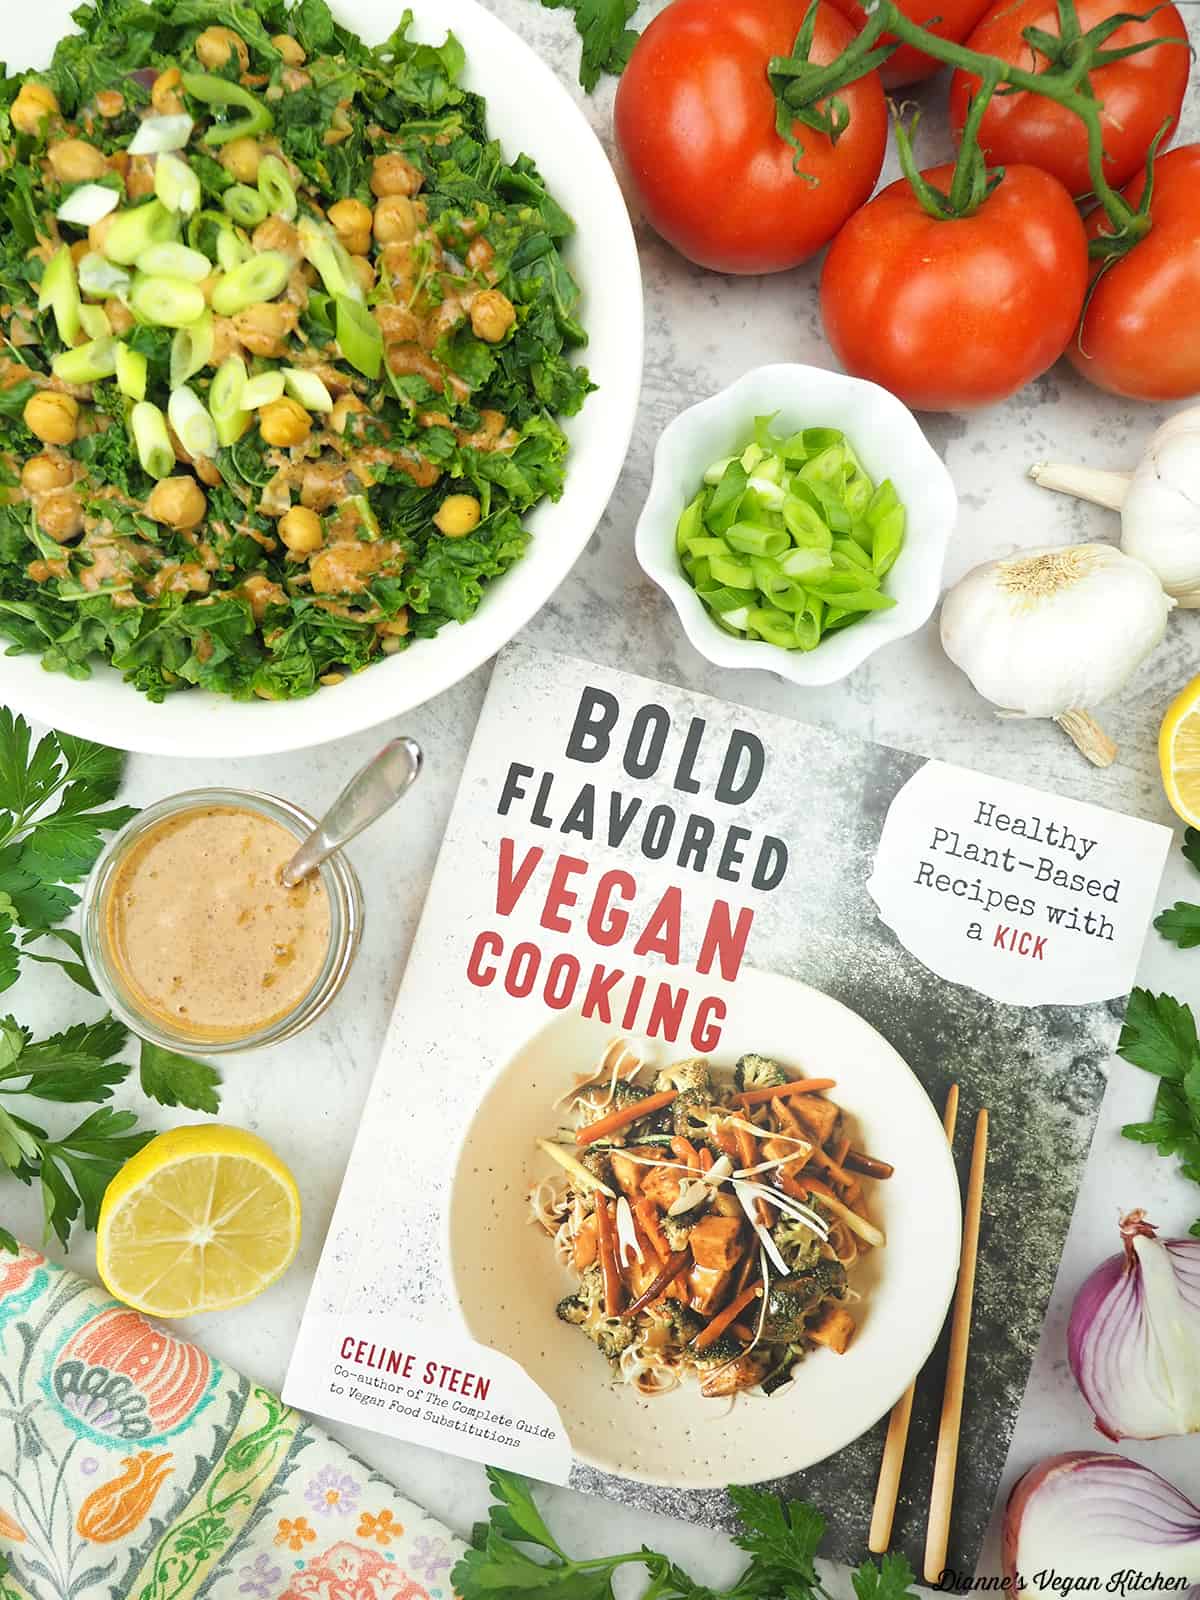 Smoky Kale and Chickpeas with Bold Flavored Vegan Cooking cookbook